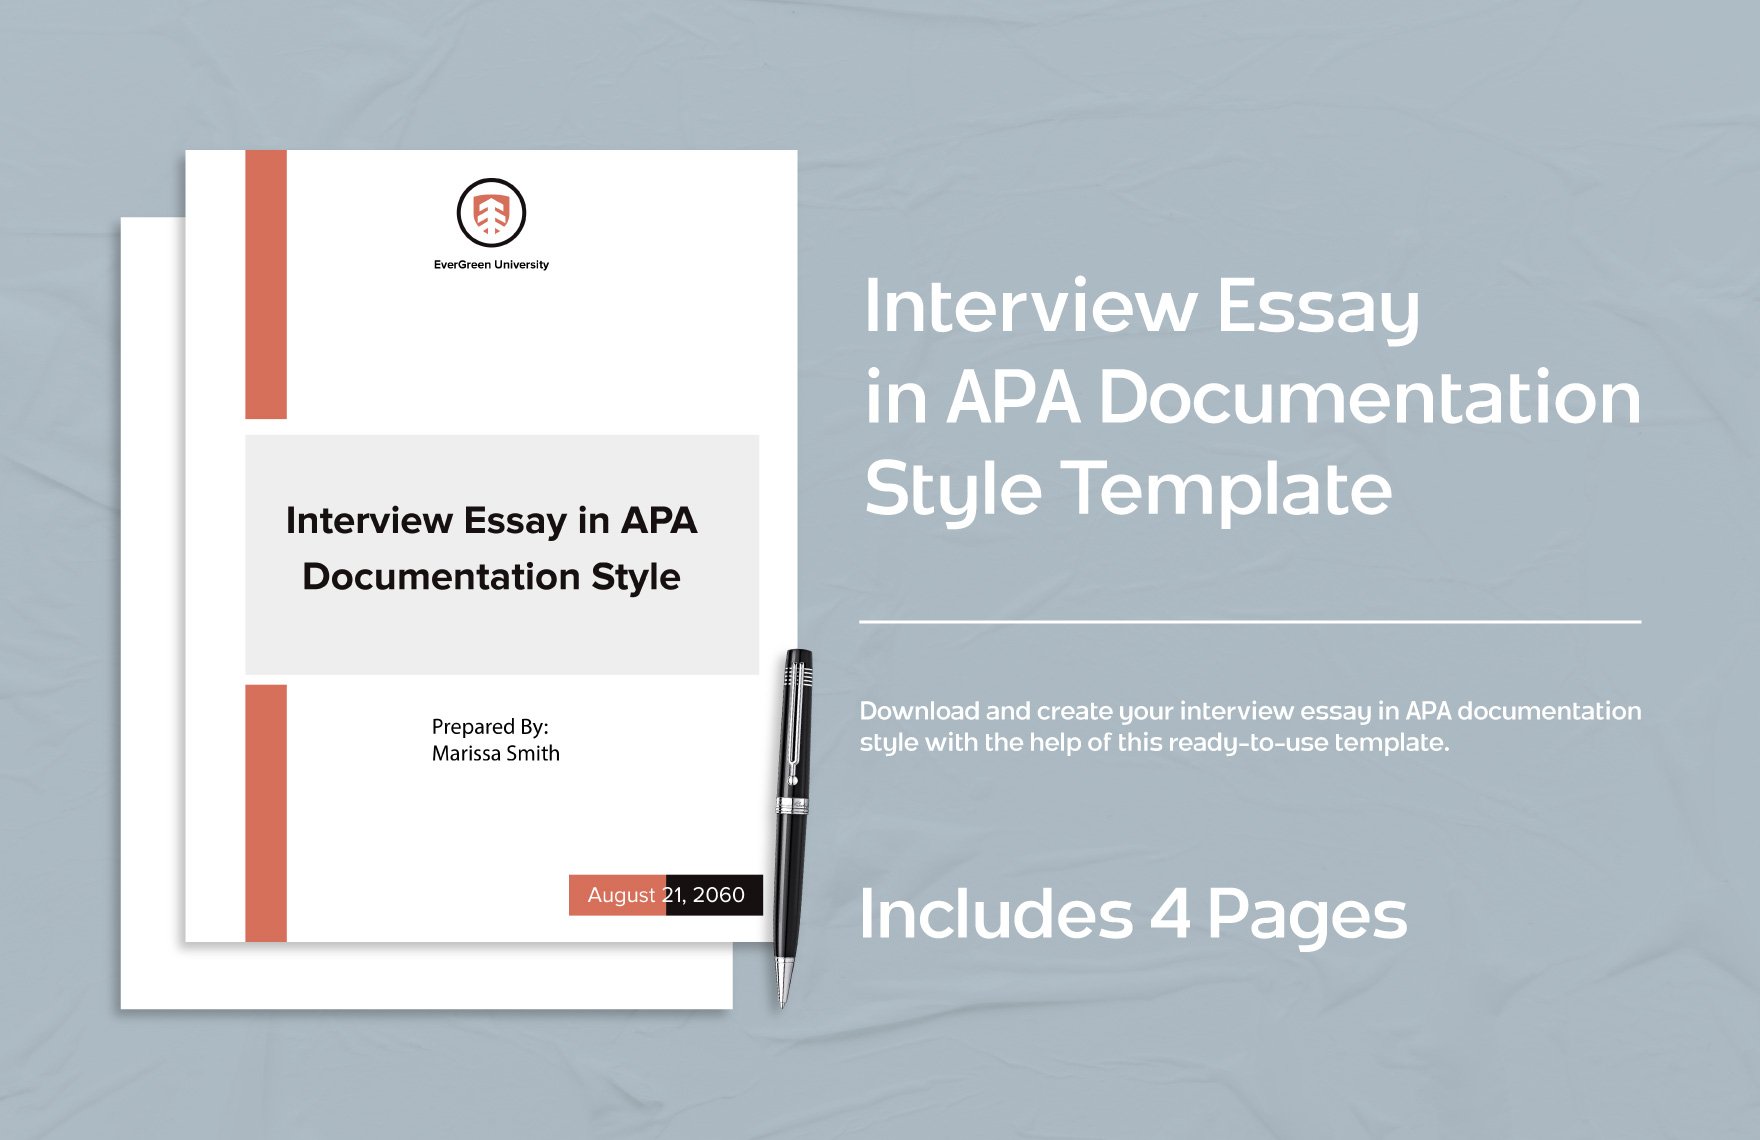 Interview Essay in APA Documentation Style Template